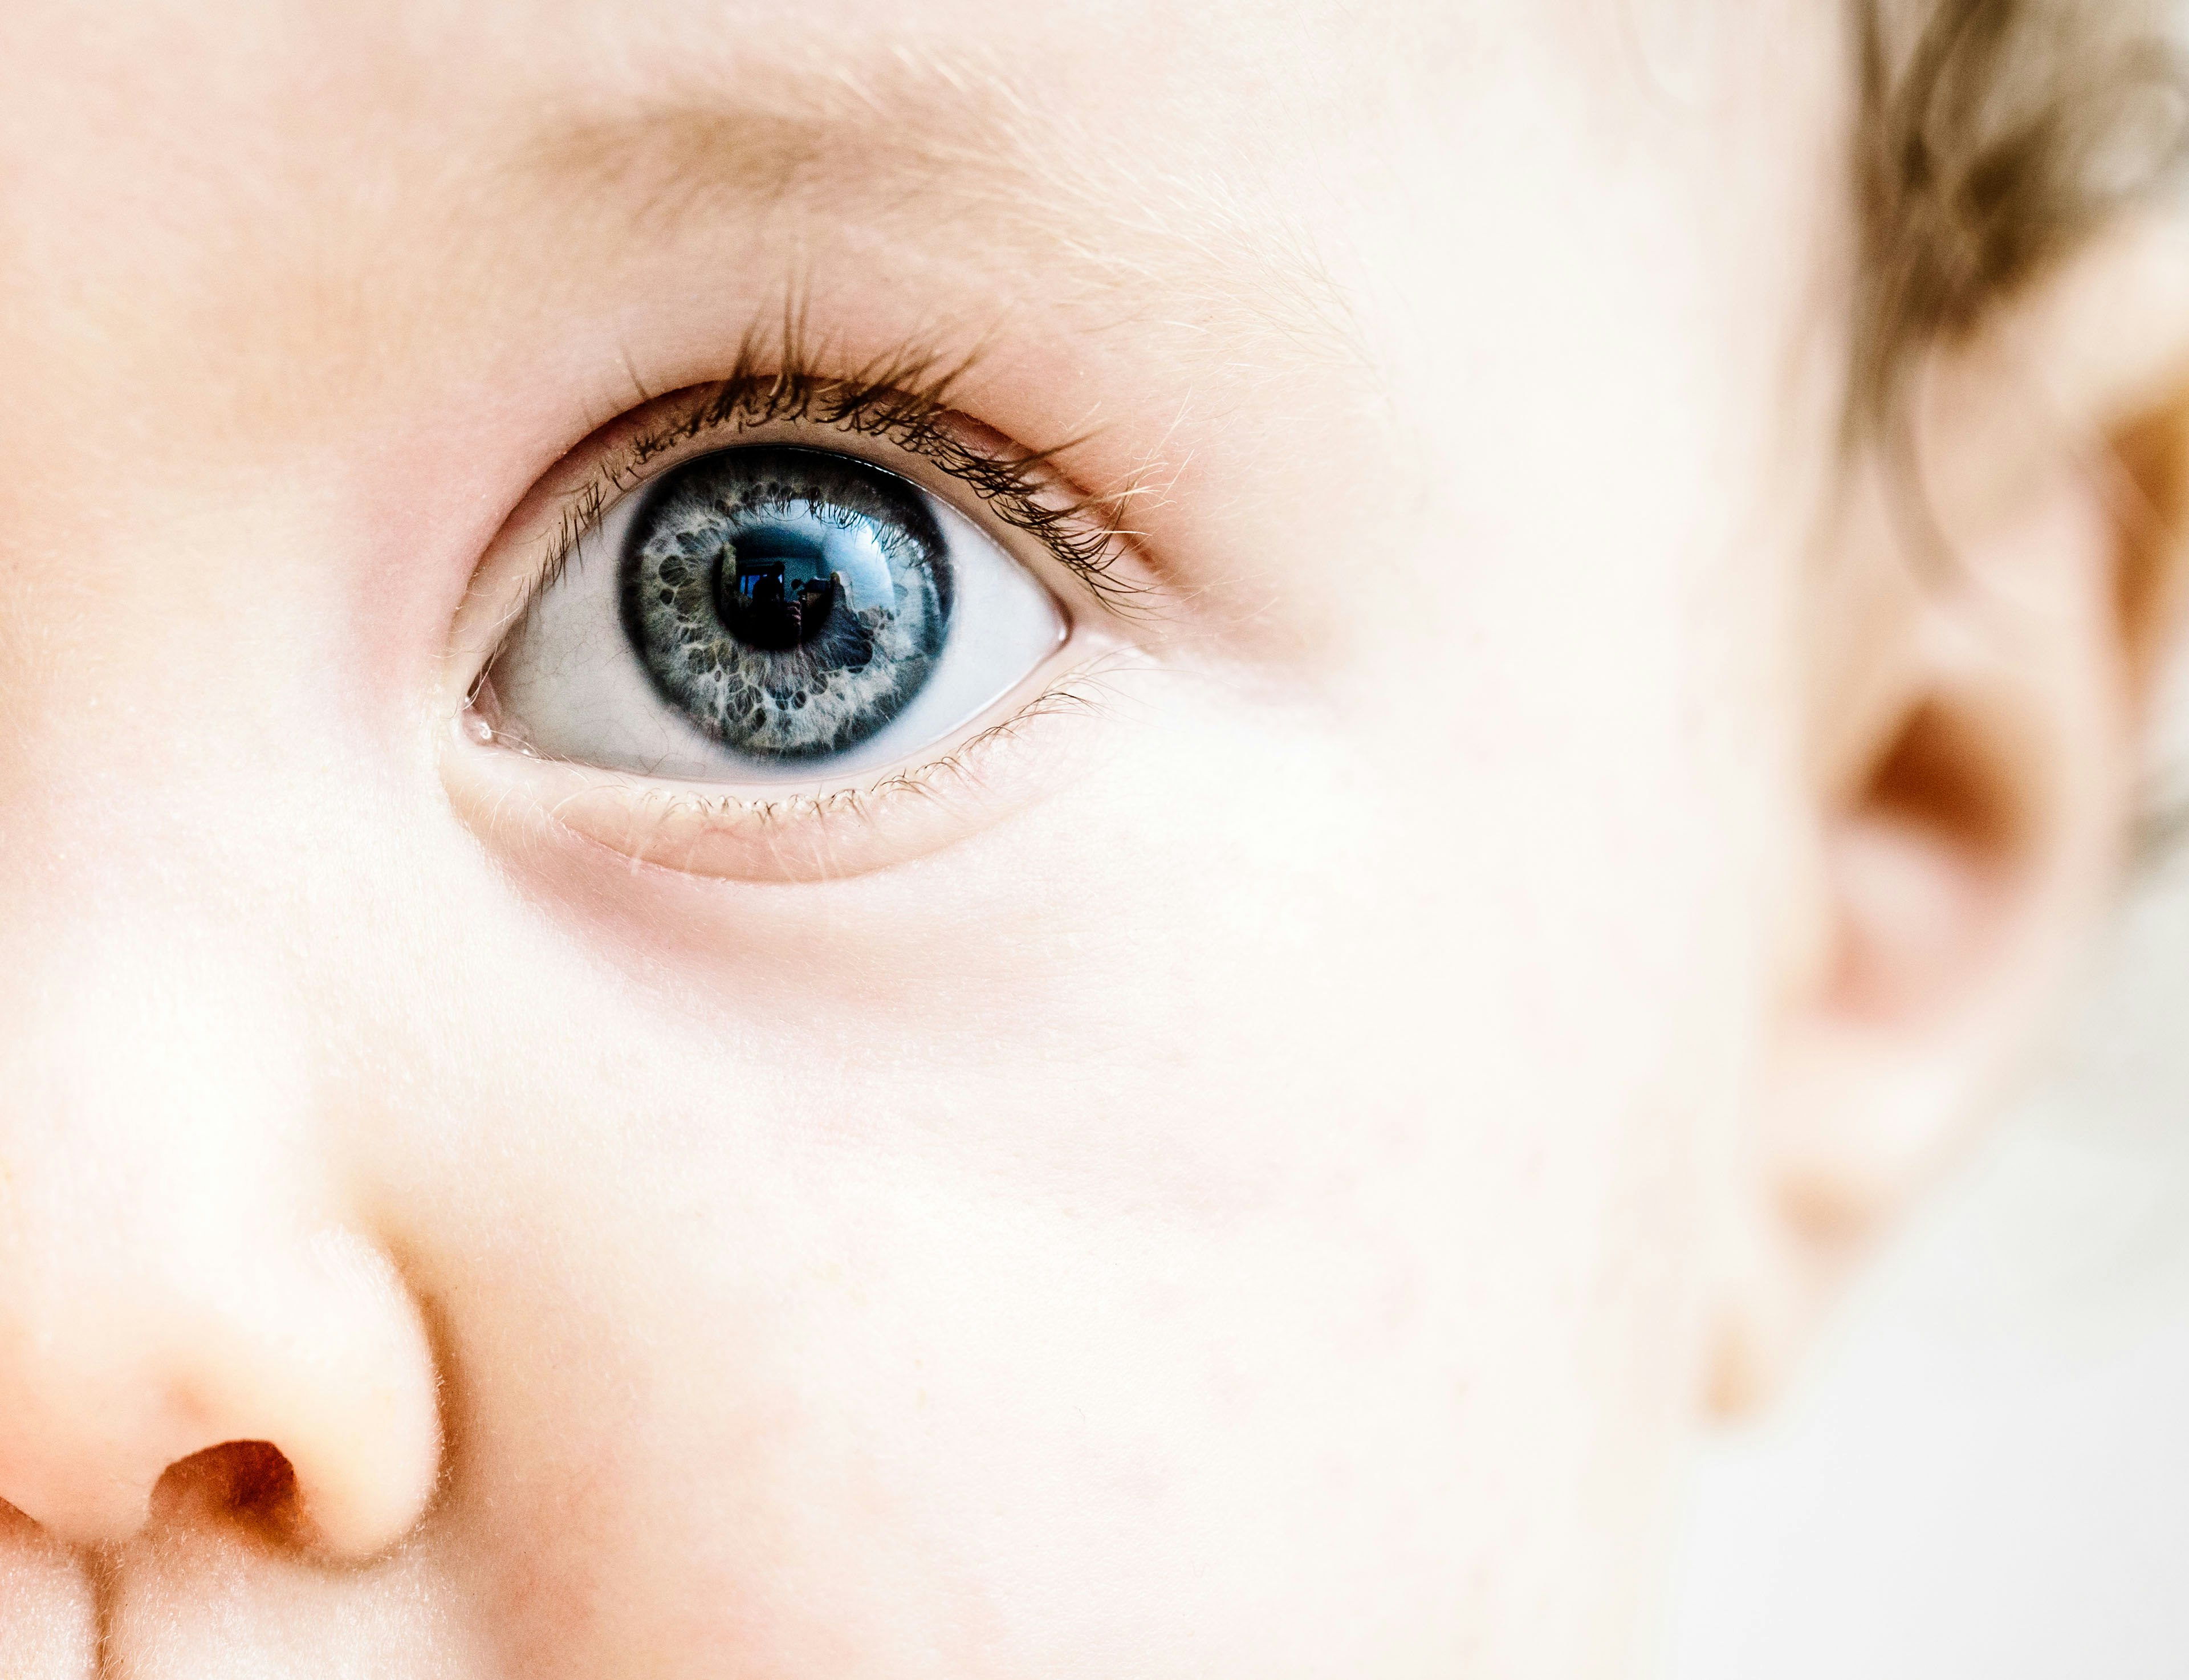 Baby Vision Development: What Can Your Baby See at Different Ages?